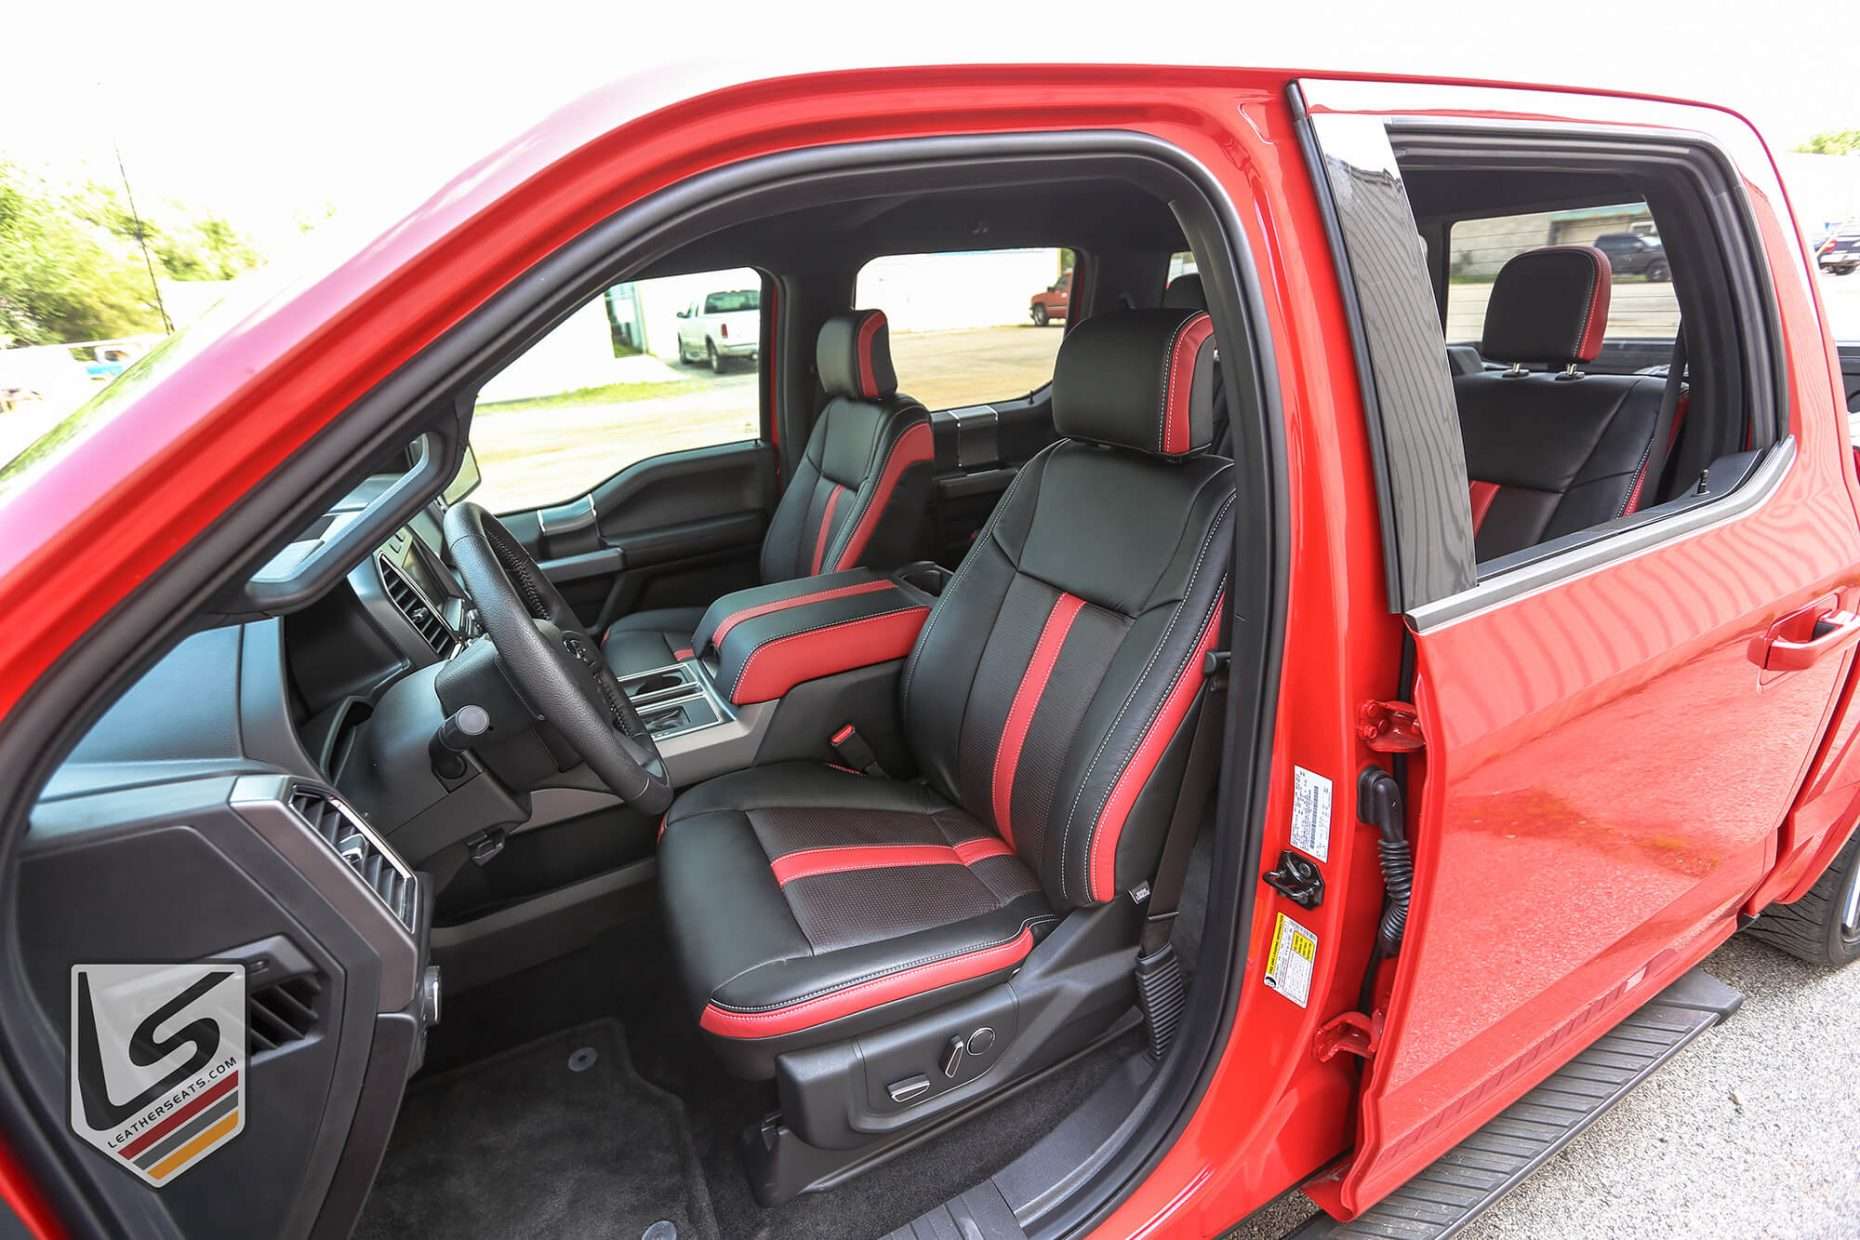 Ford Leather Interior - Black/Bright Red/Piazza Red with custom leather console lid